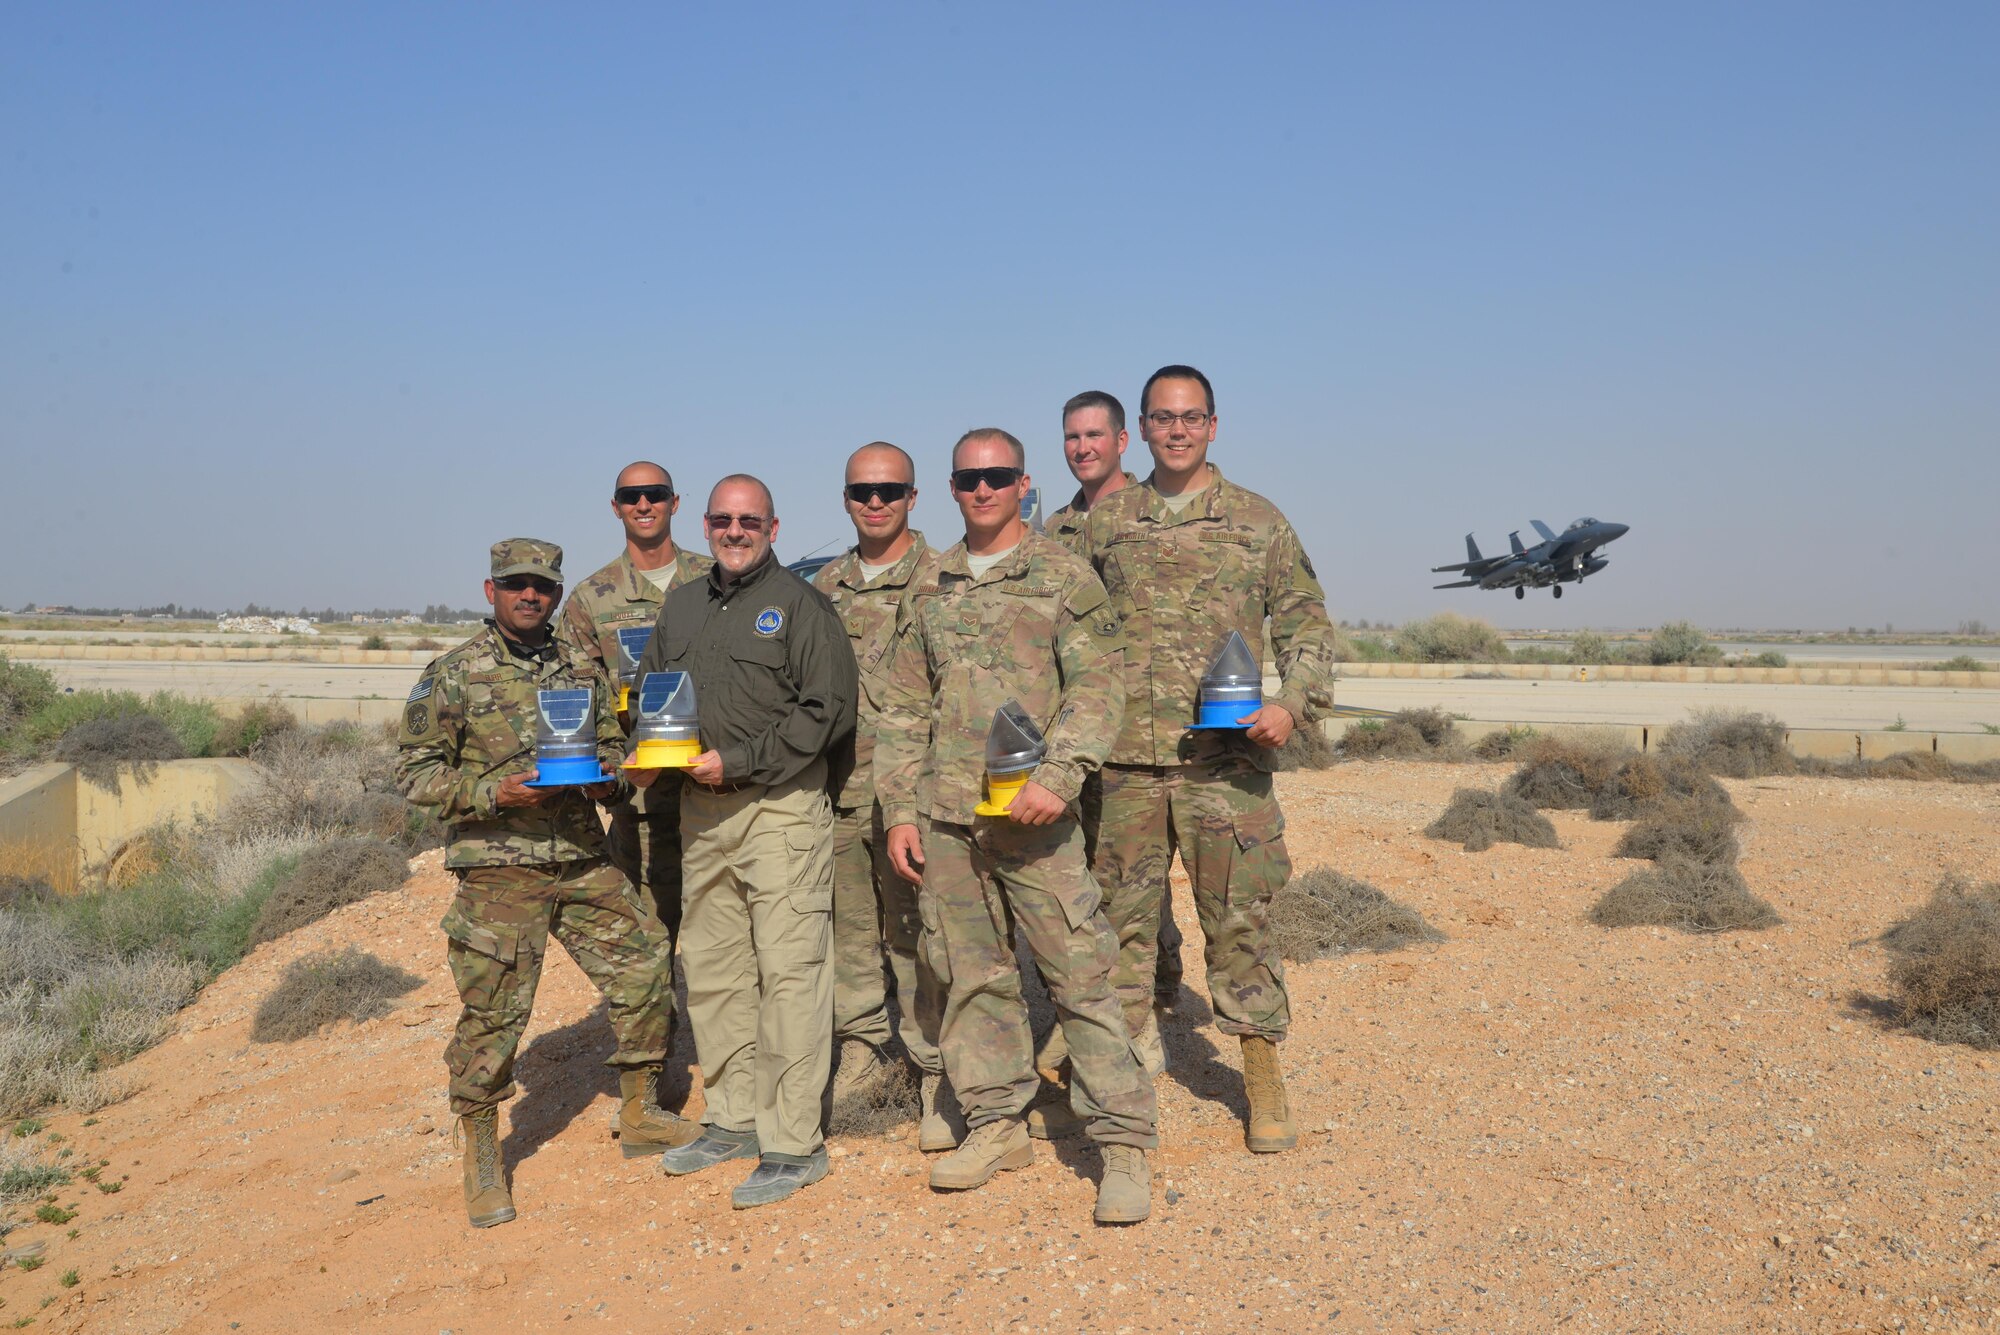 Members from the 332nd Expeditionary Civil Engineer Squadron pose with solar lights as an F-15E Strike Eagle lands behind them, May 10th, 2017, in Southwest Asia.  The 332nd ECES squadron installed solar lights on the flight line, making it safer for pilots during night operations. (U.S. Air Force Photo by Staff Sgt. Samuel O’Brien)